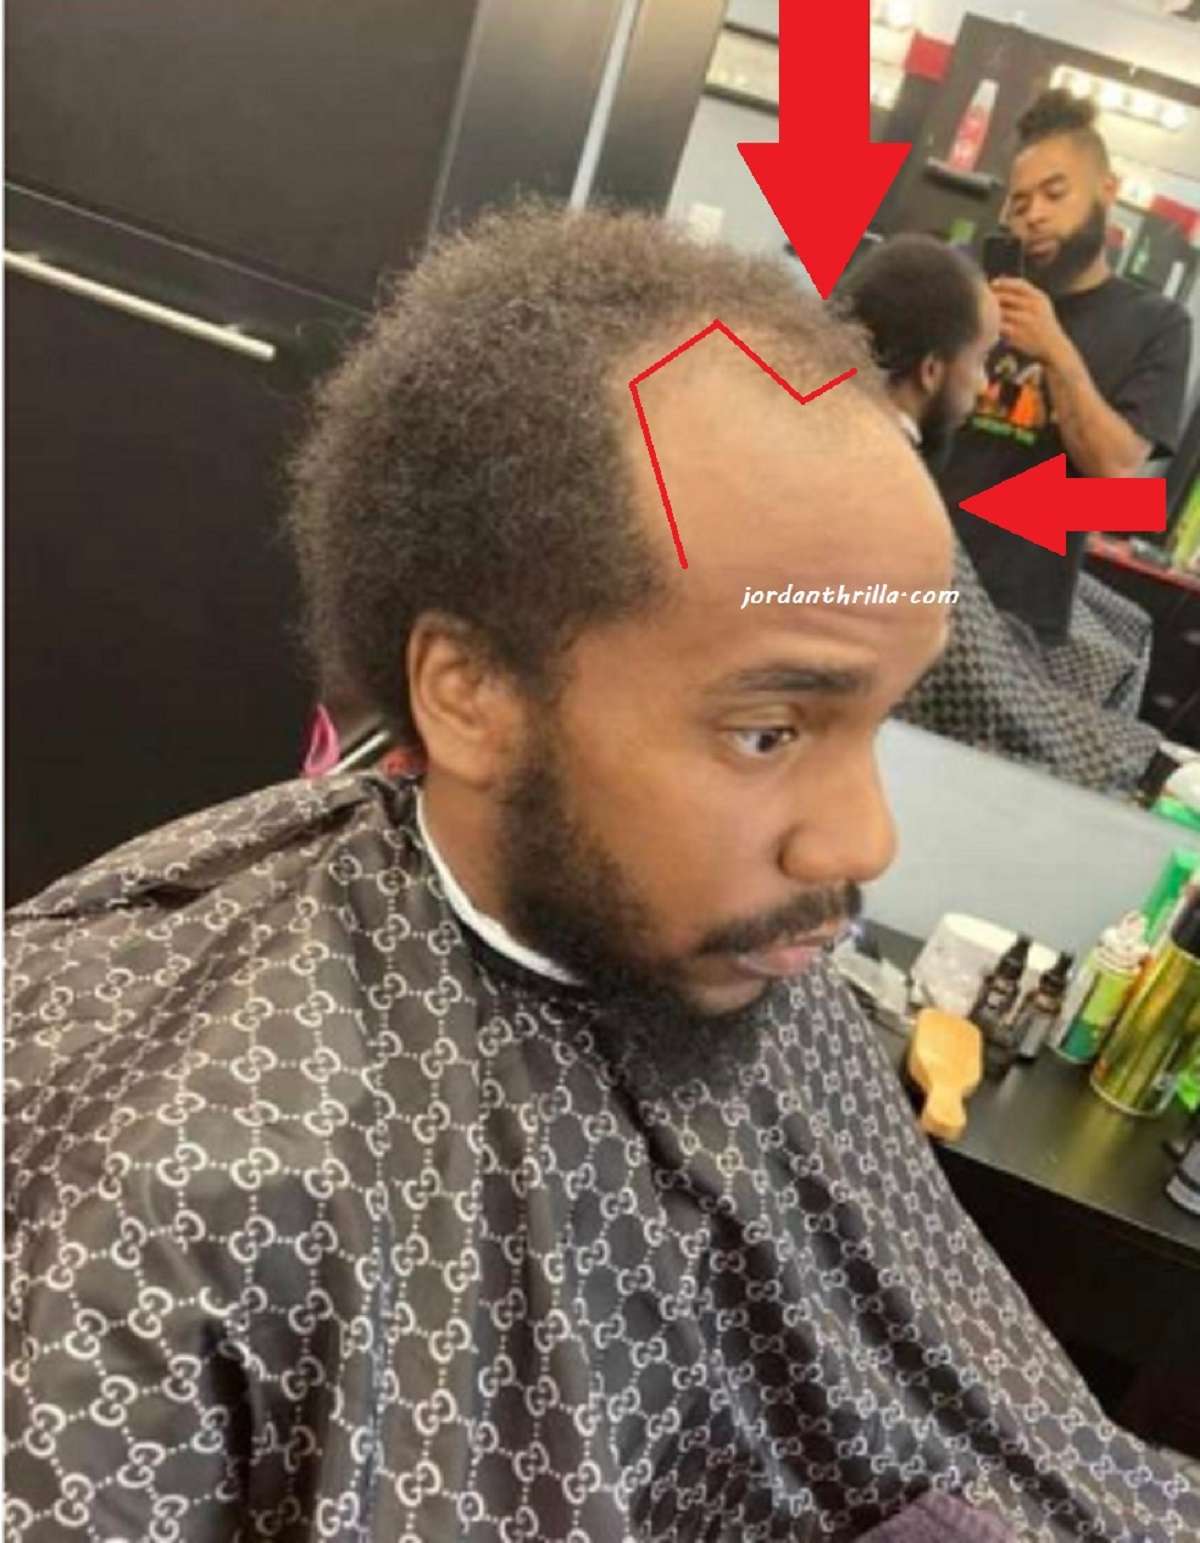 Barber Discovers How to Fade George Jefferson Balding